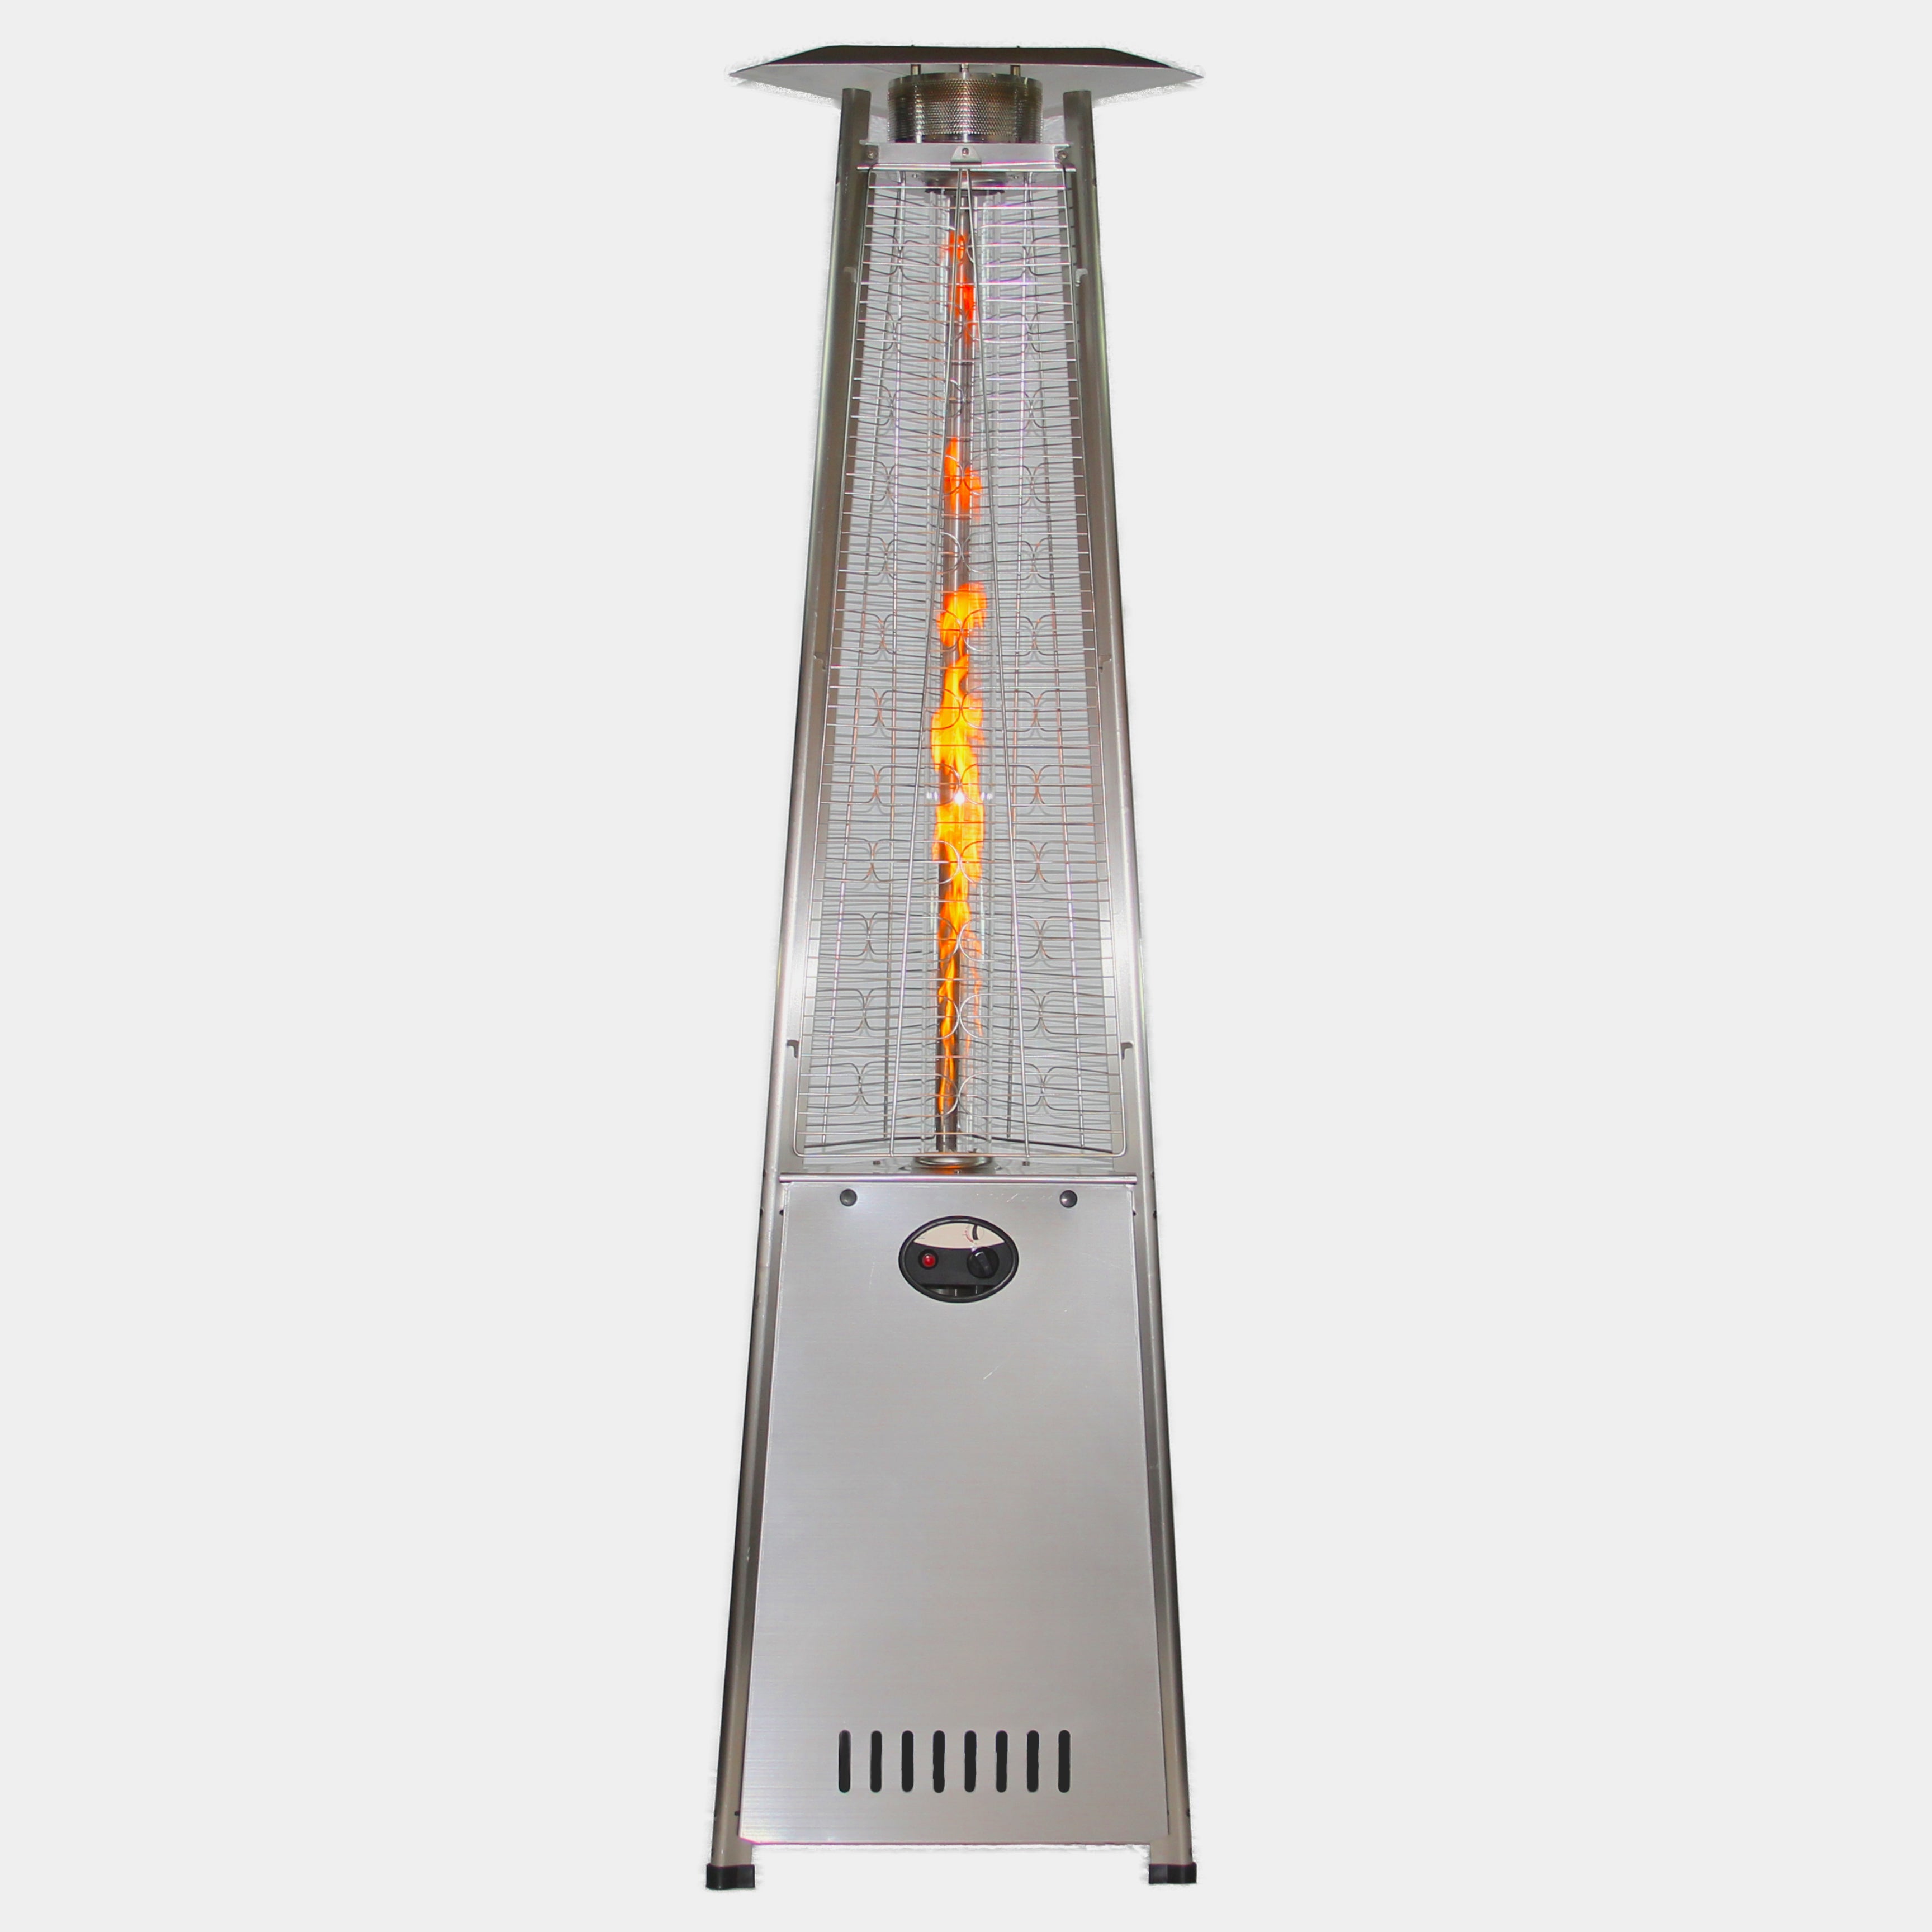 RADtec 93 Pyramid Flame Natural Gas Patio Heater - Stainless Steel Finish 41,000 BTU - 93-NTR-GAS-PYR - Main View